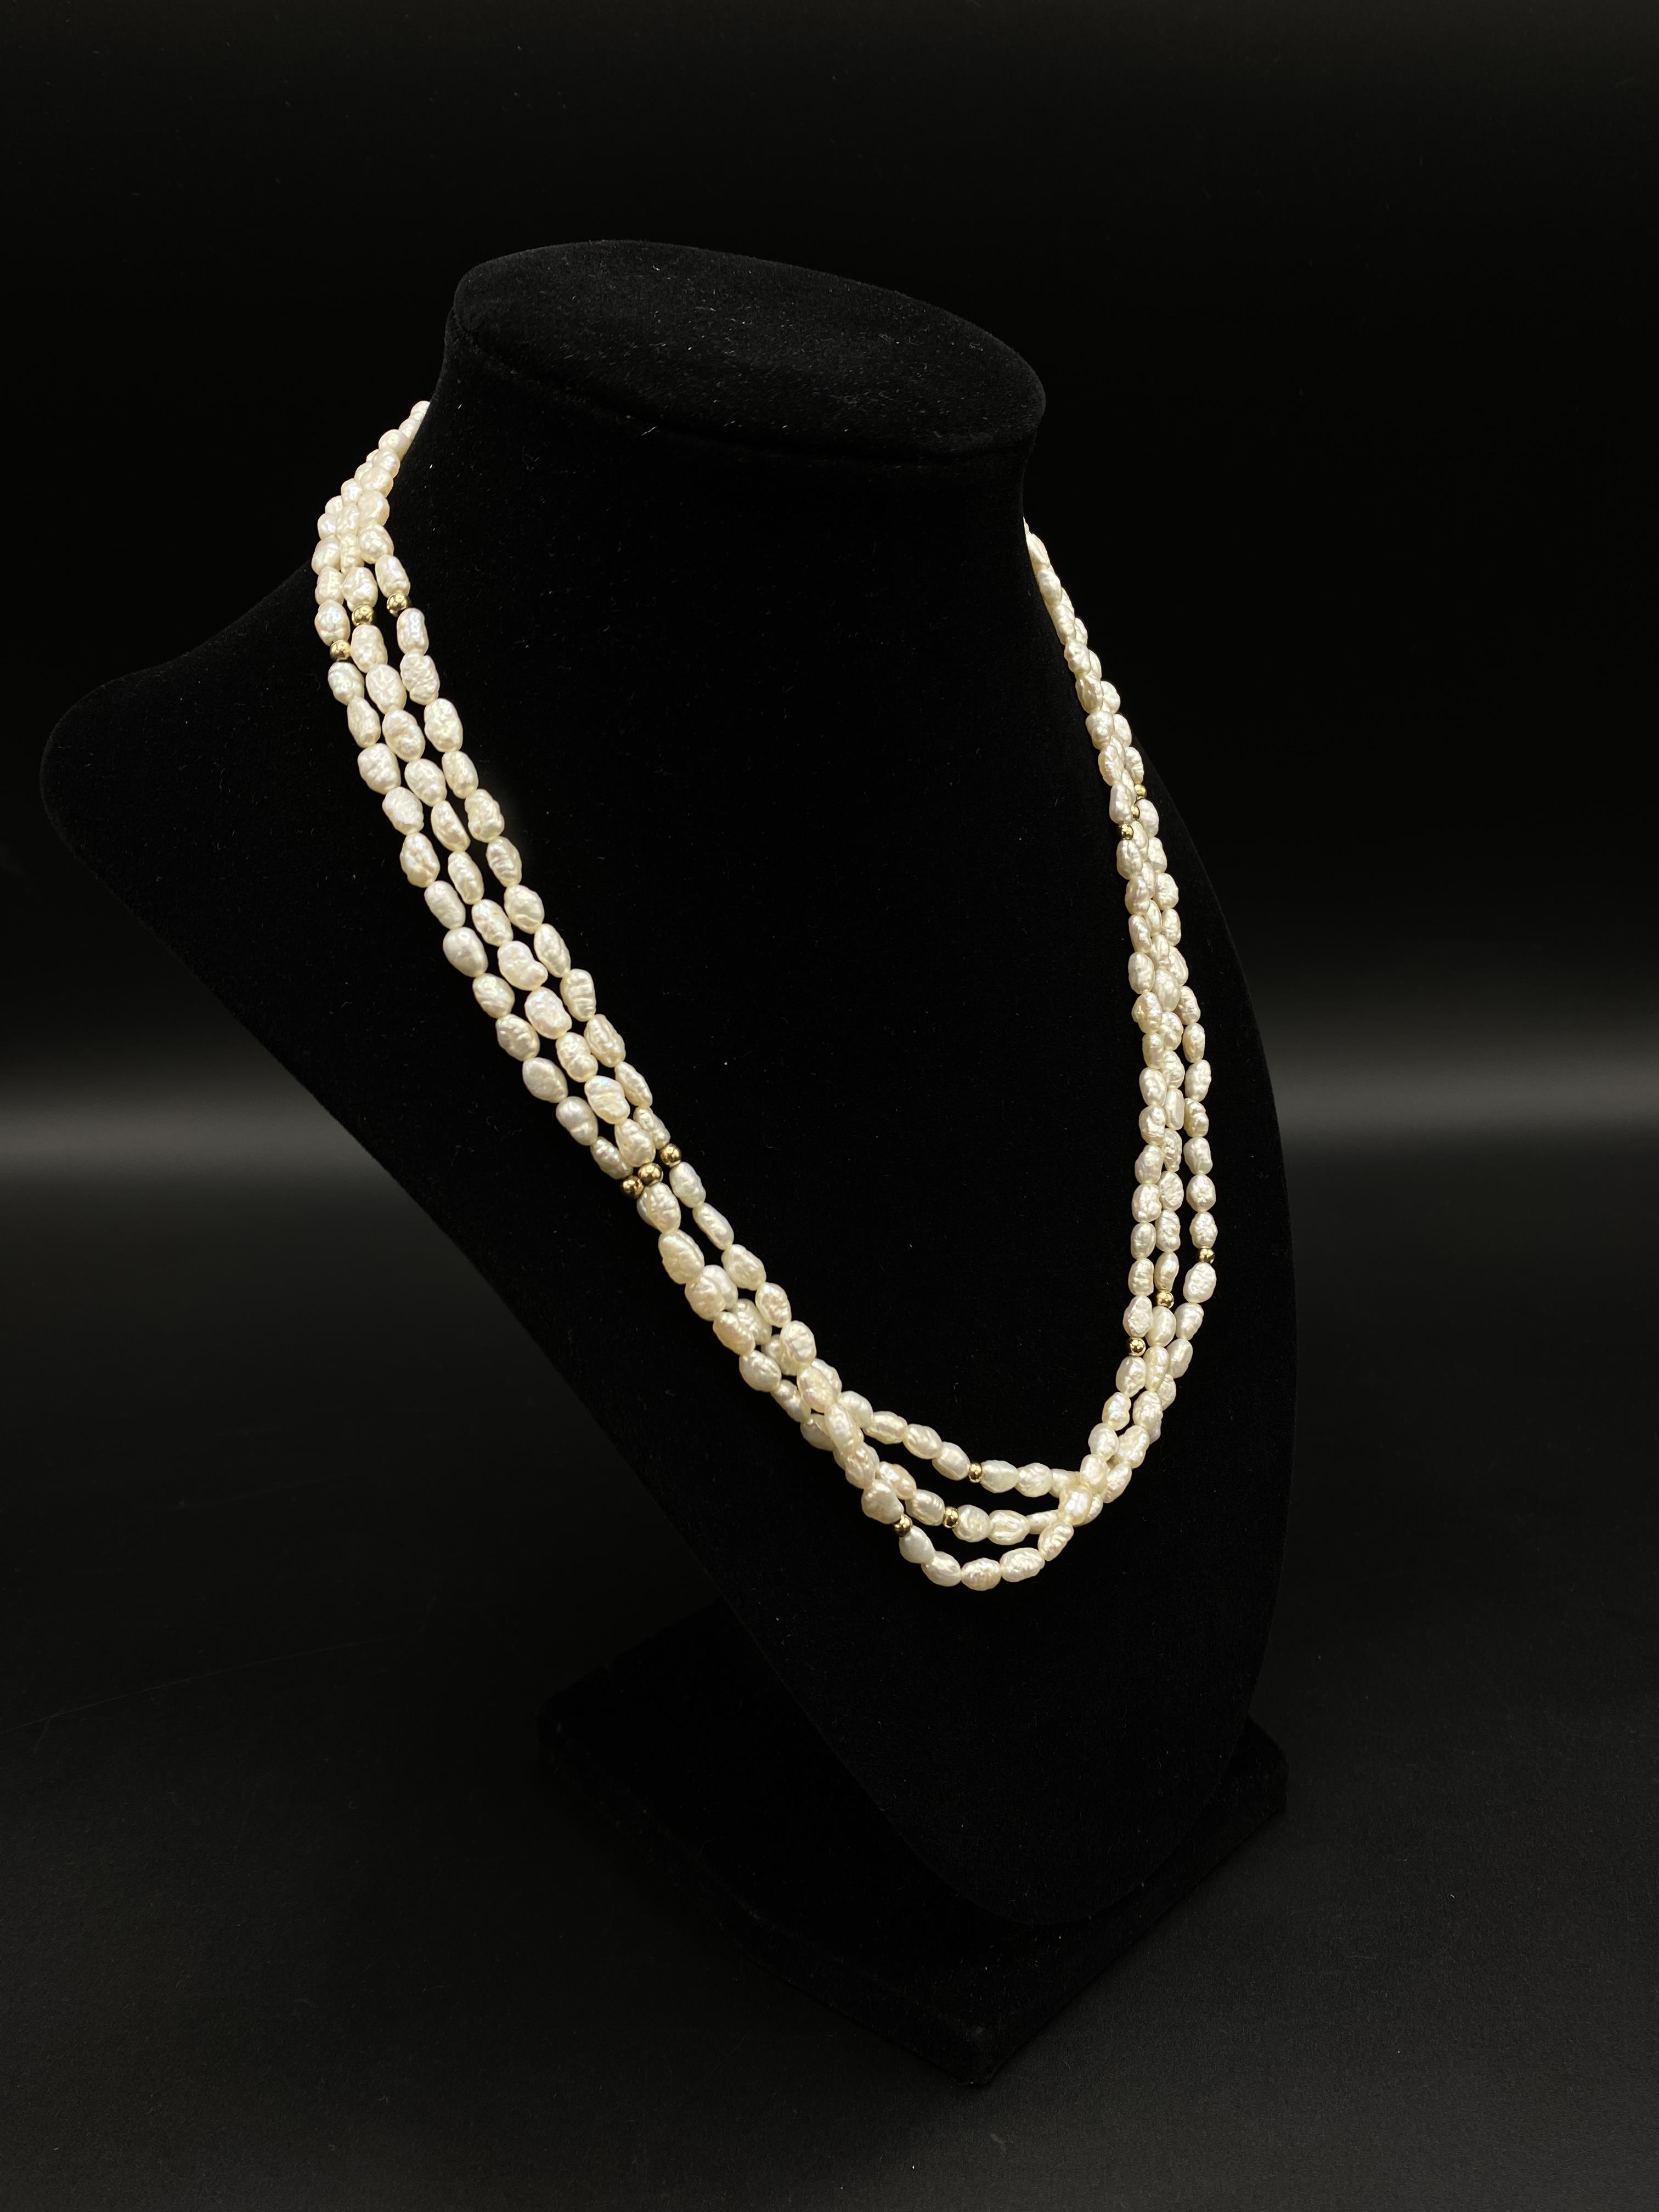 Two pearl necklaces with gold clasps - Image 6 of 9